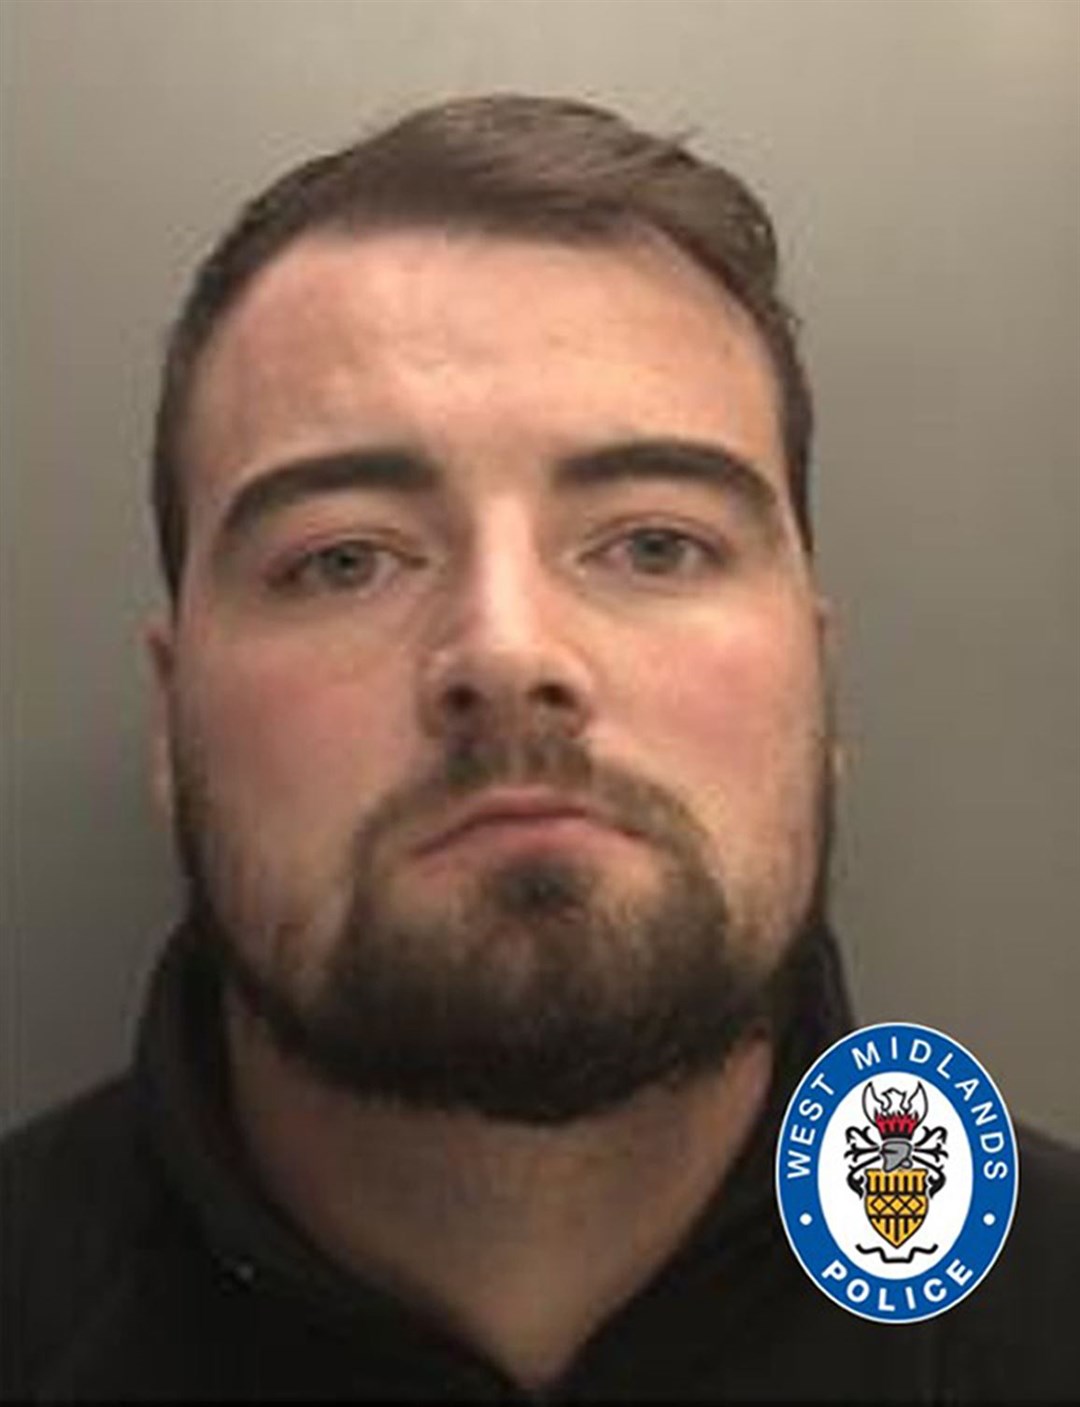 Former Pc Alexander Hindmarsh has been jailed for 19 months (West Midlands Police/PA)